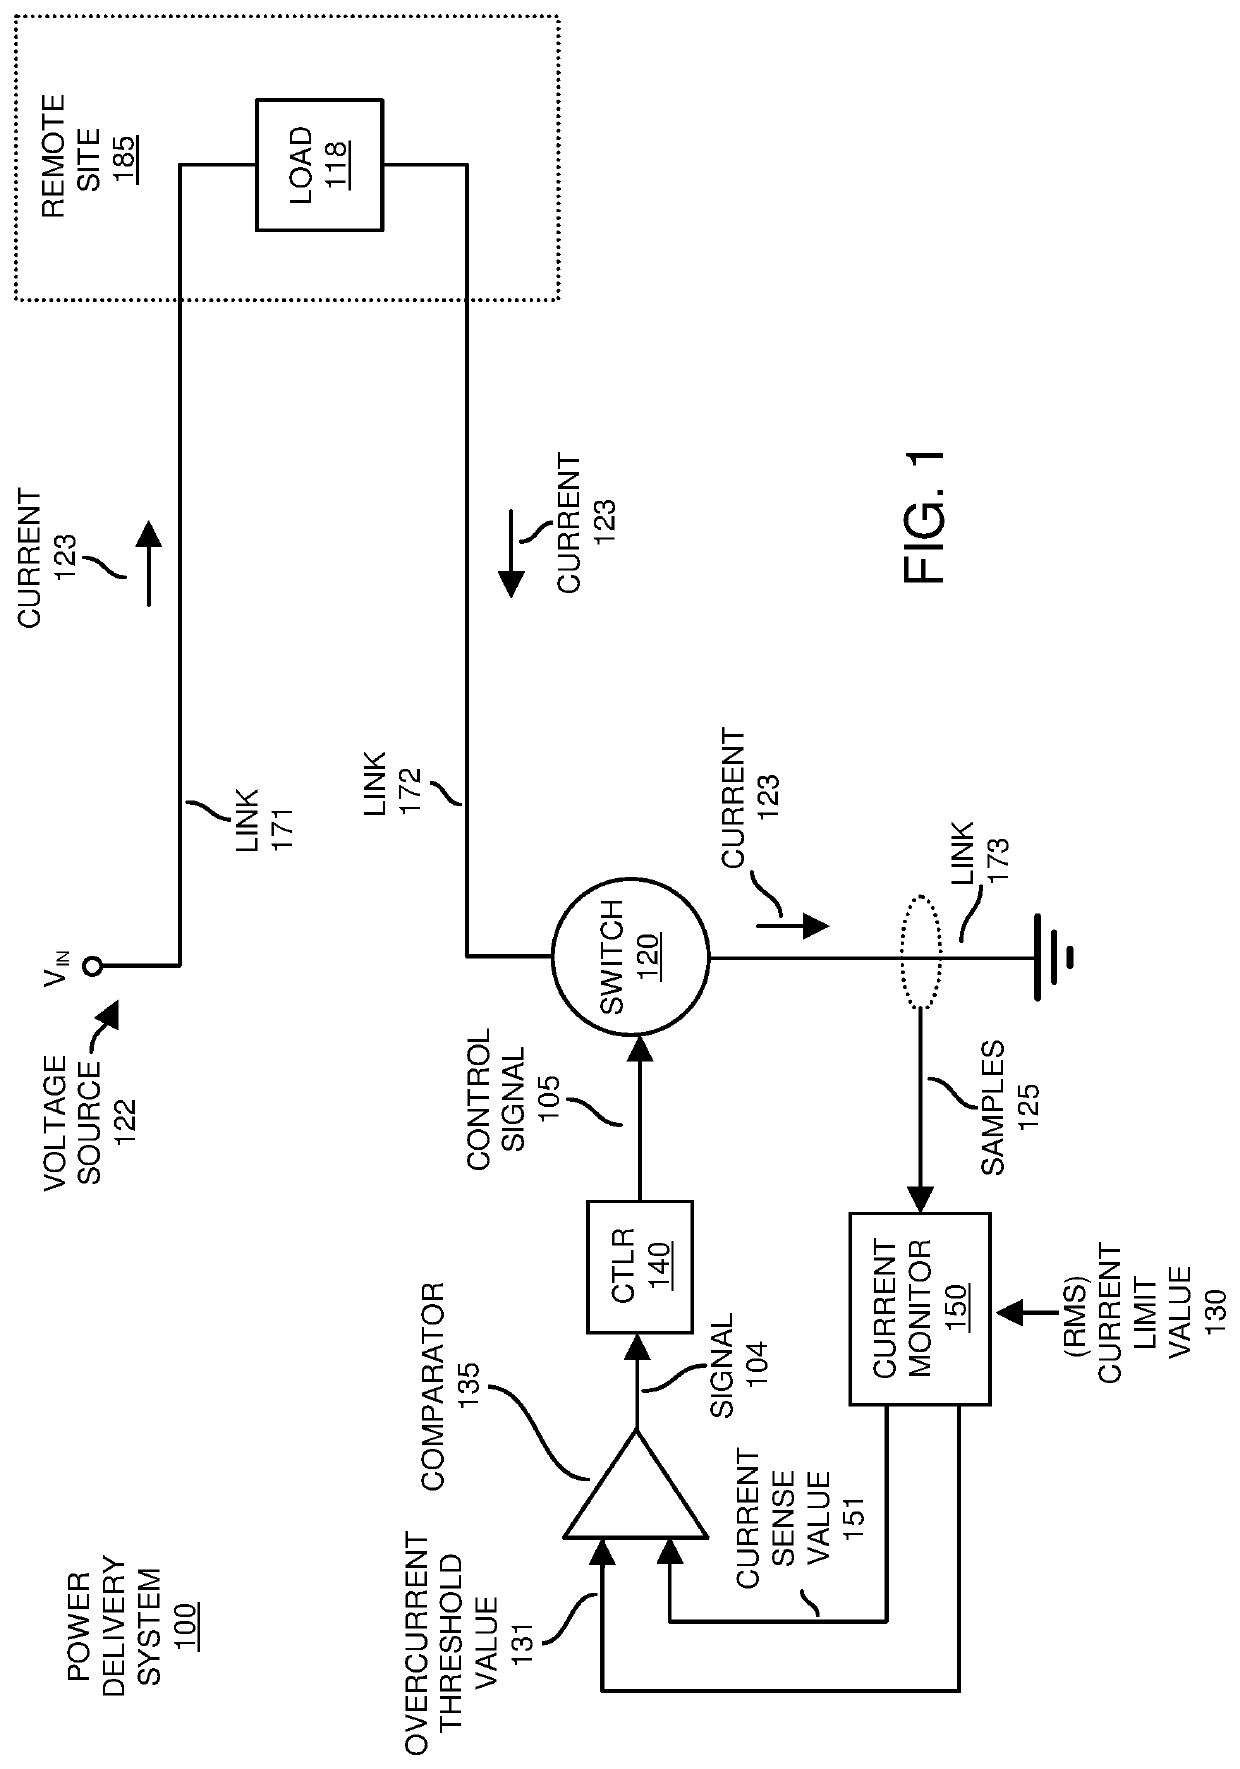 Power delivery control and over current protection